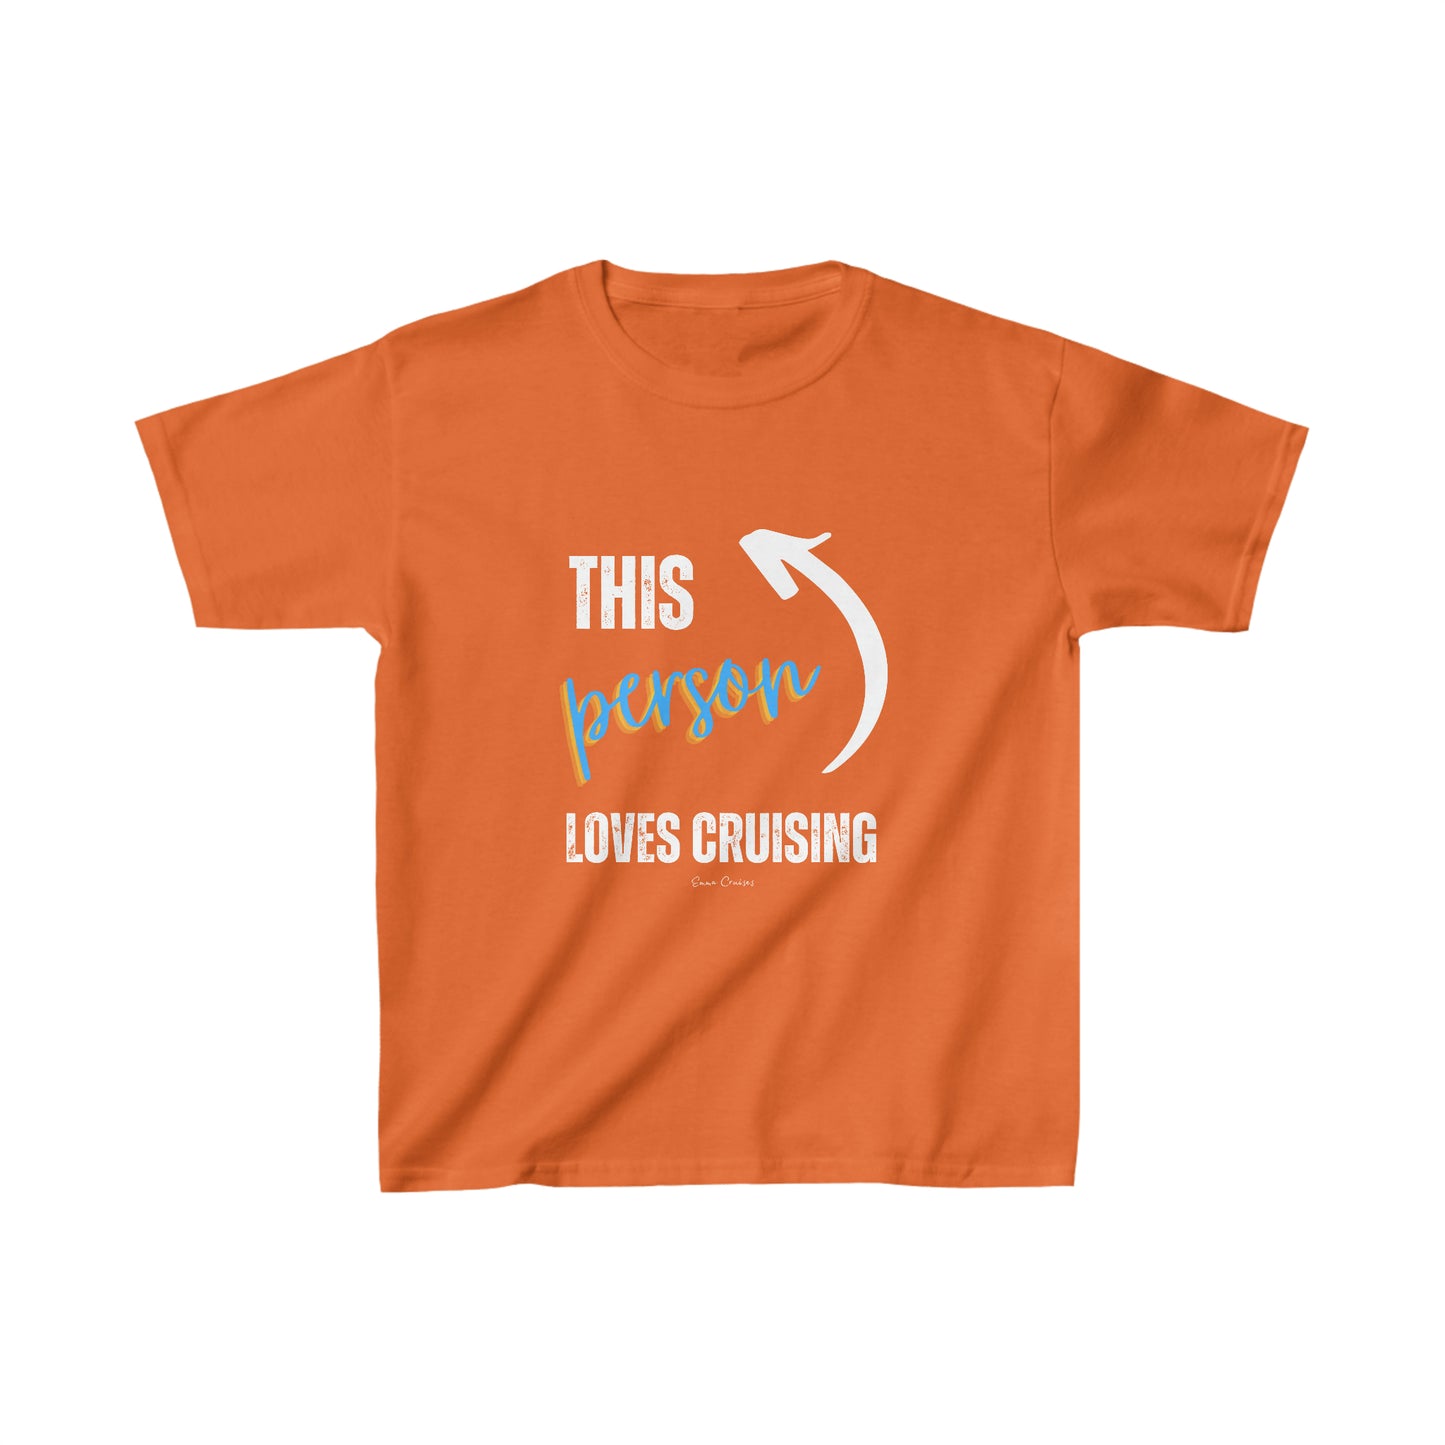 This Person Loves Cruising - Kids UNISEX T-Shirt